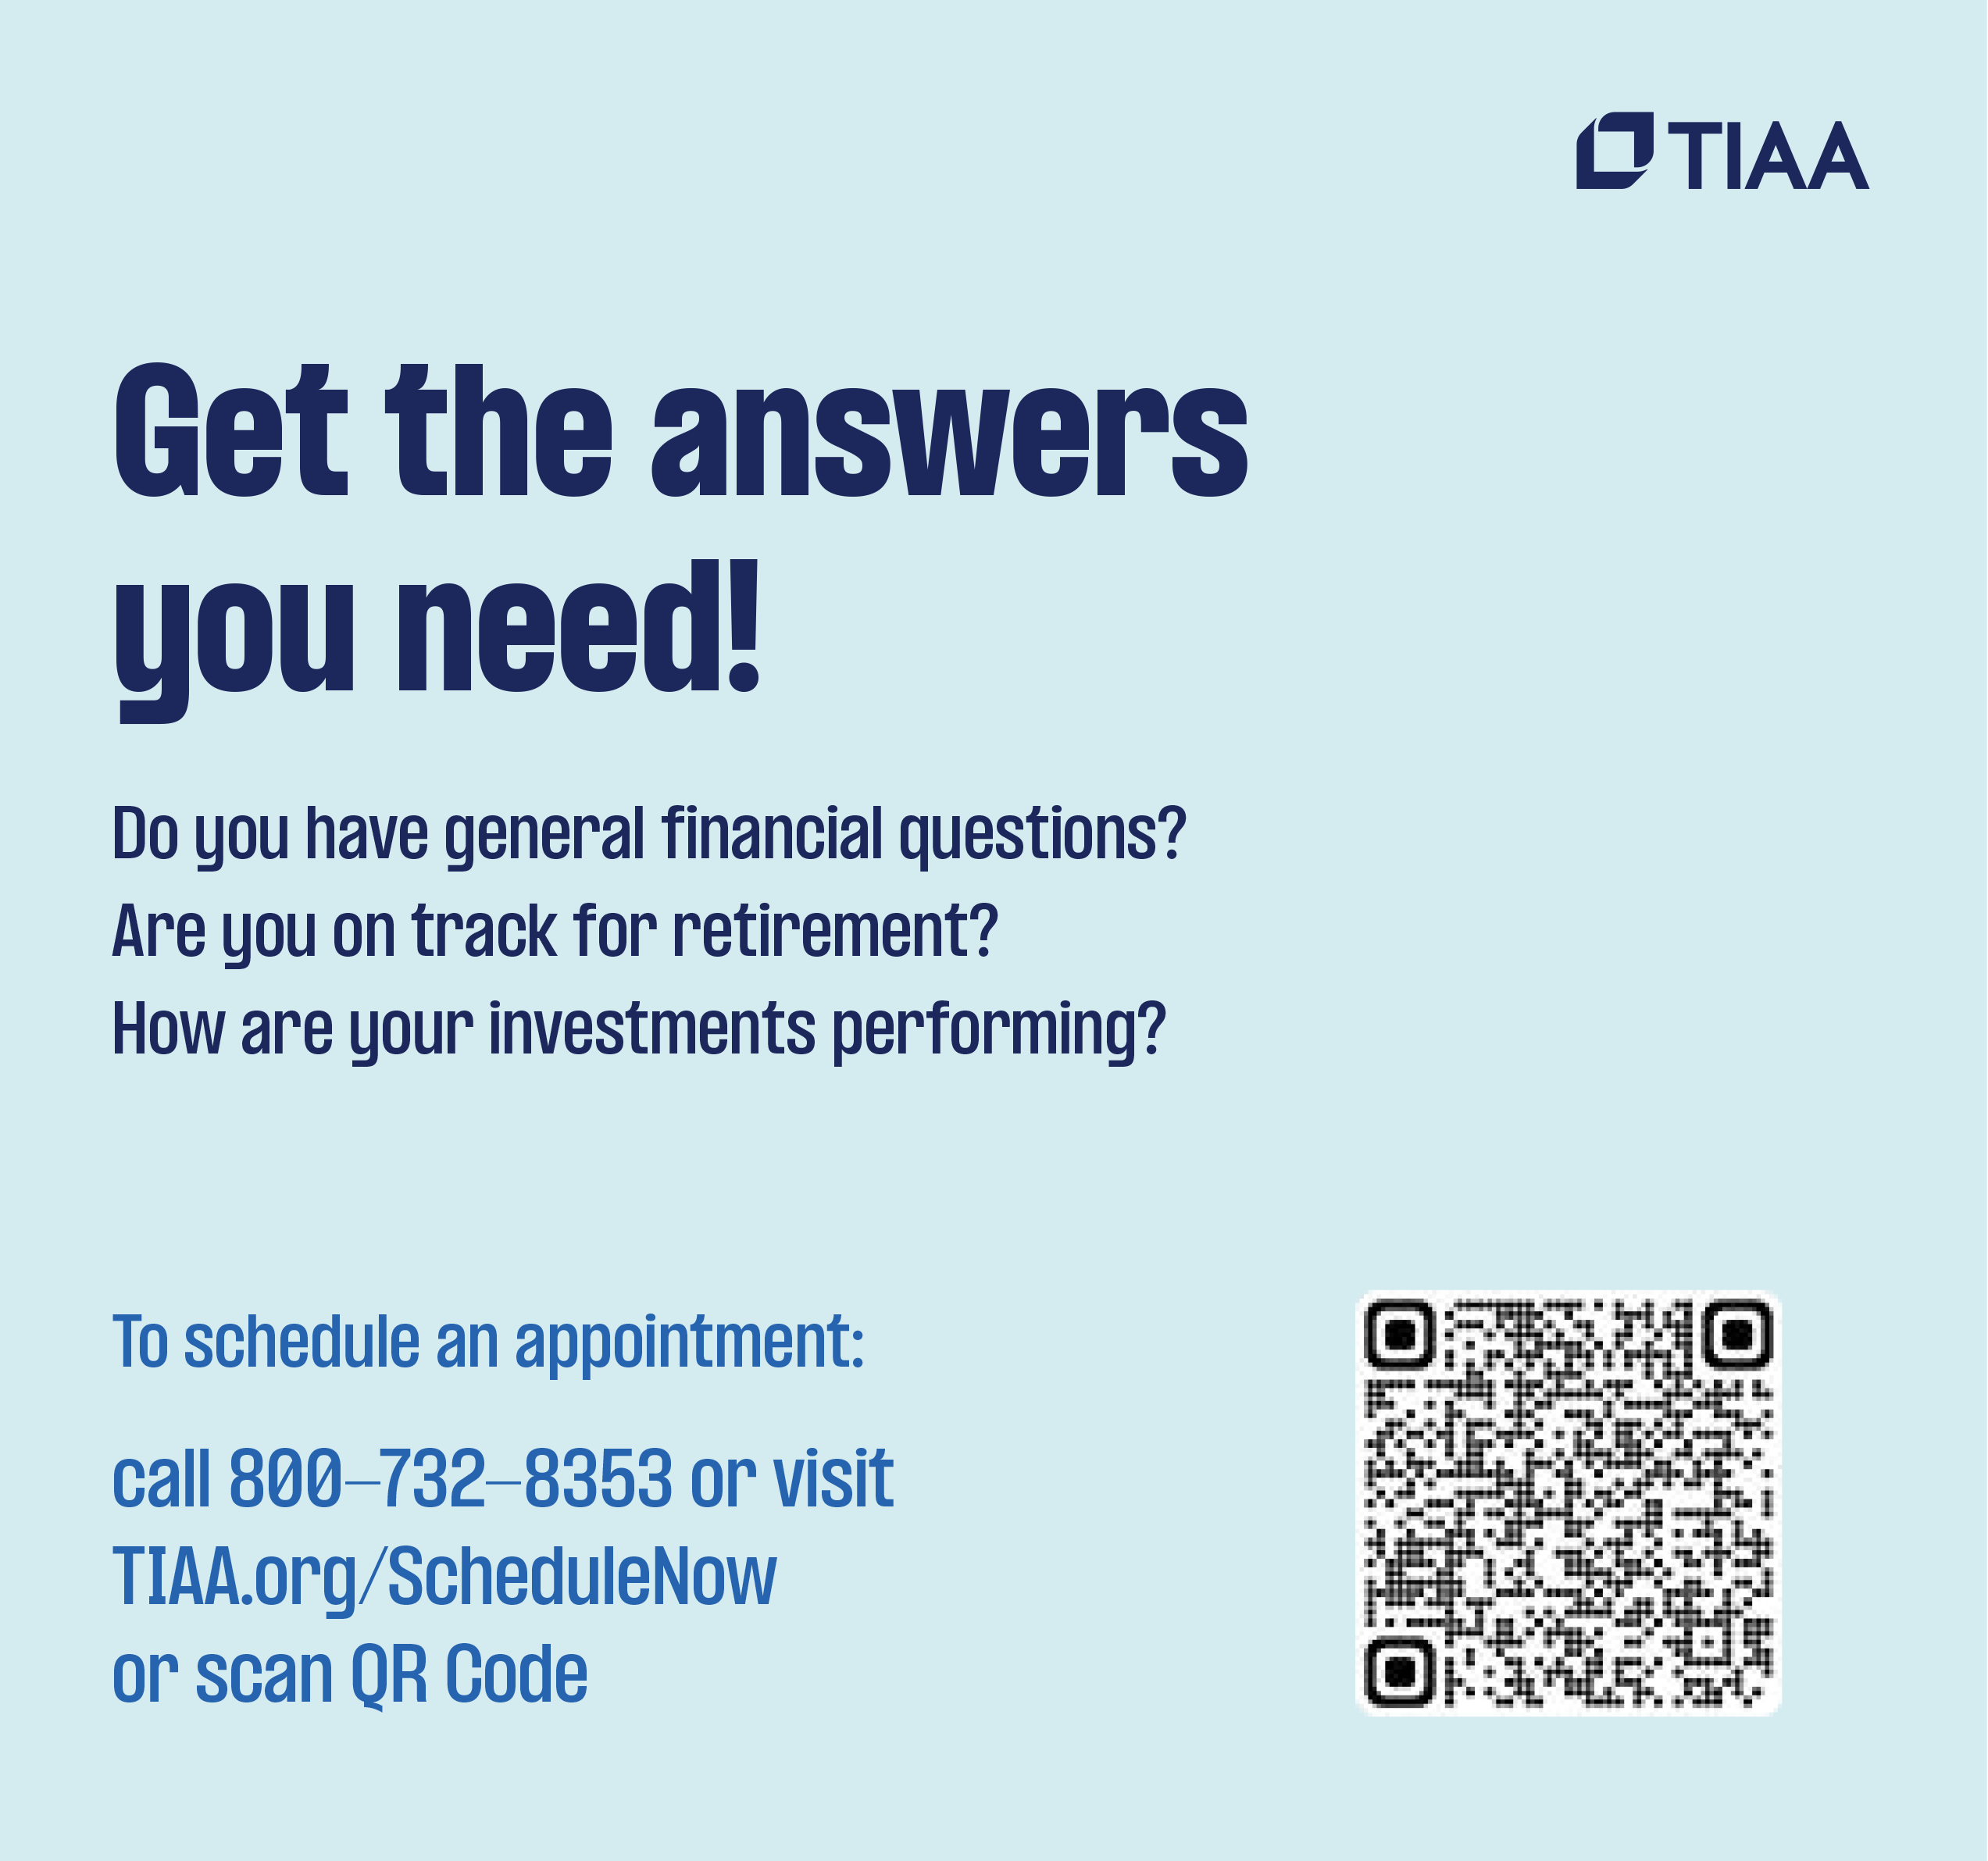 Get the Answers you need! Do you have general financial questions? Are you on track for retirement? How are your investments performing? To schedule an appointment: call 800-732-8353 or visit TIAA.org/schedulenow or scan QR Code